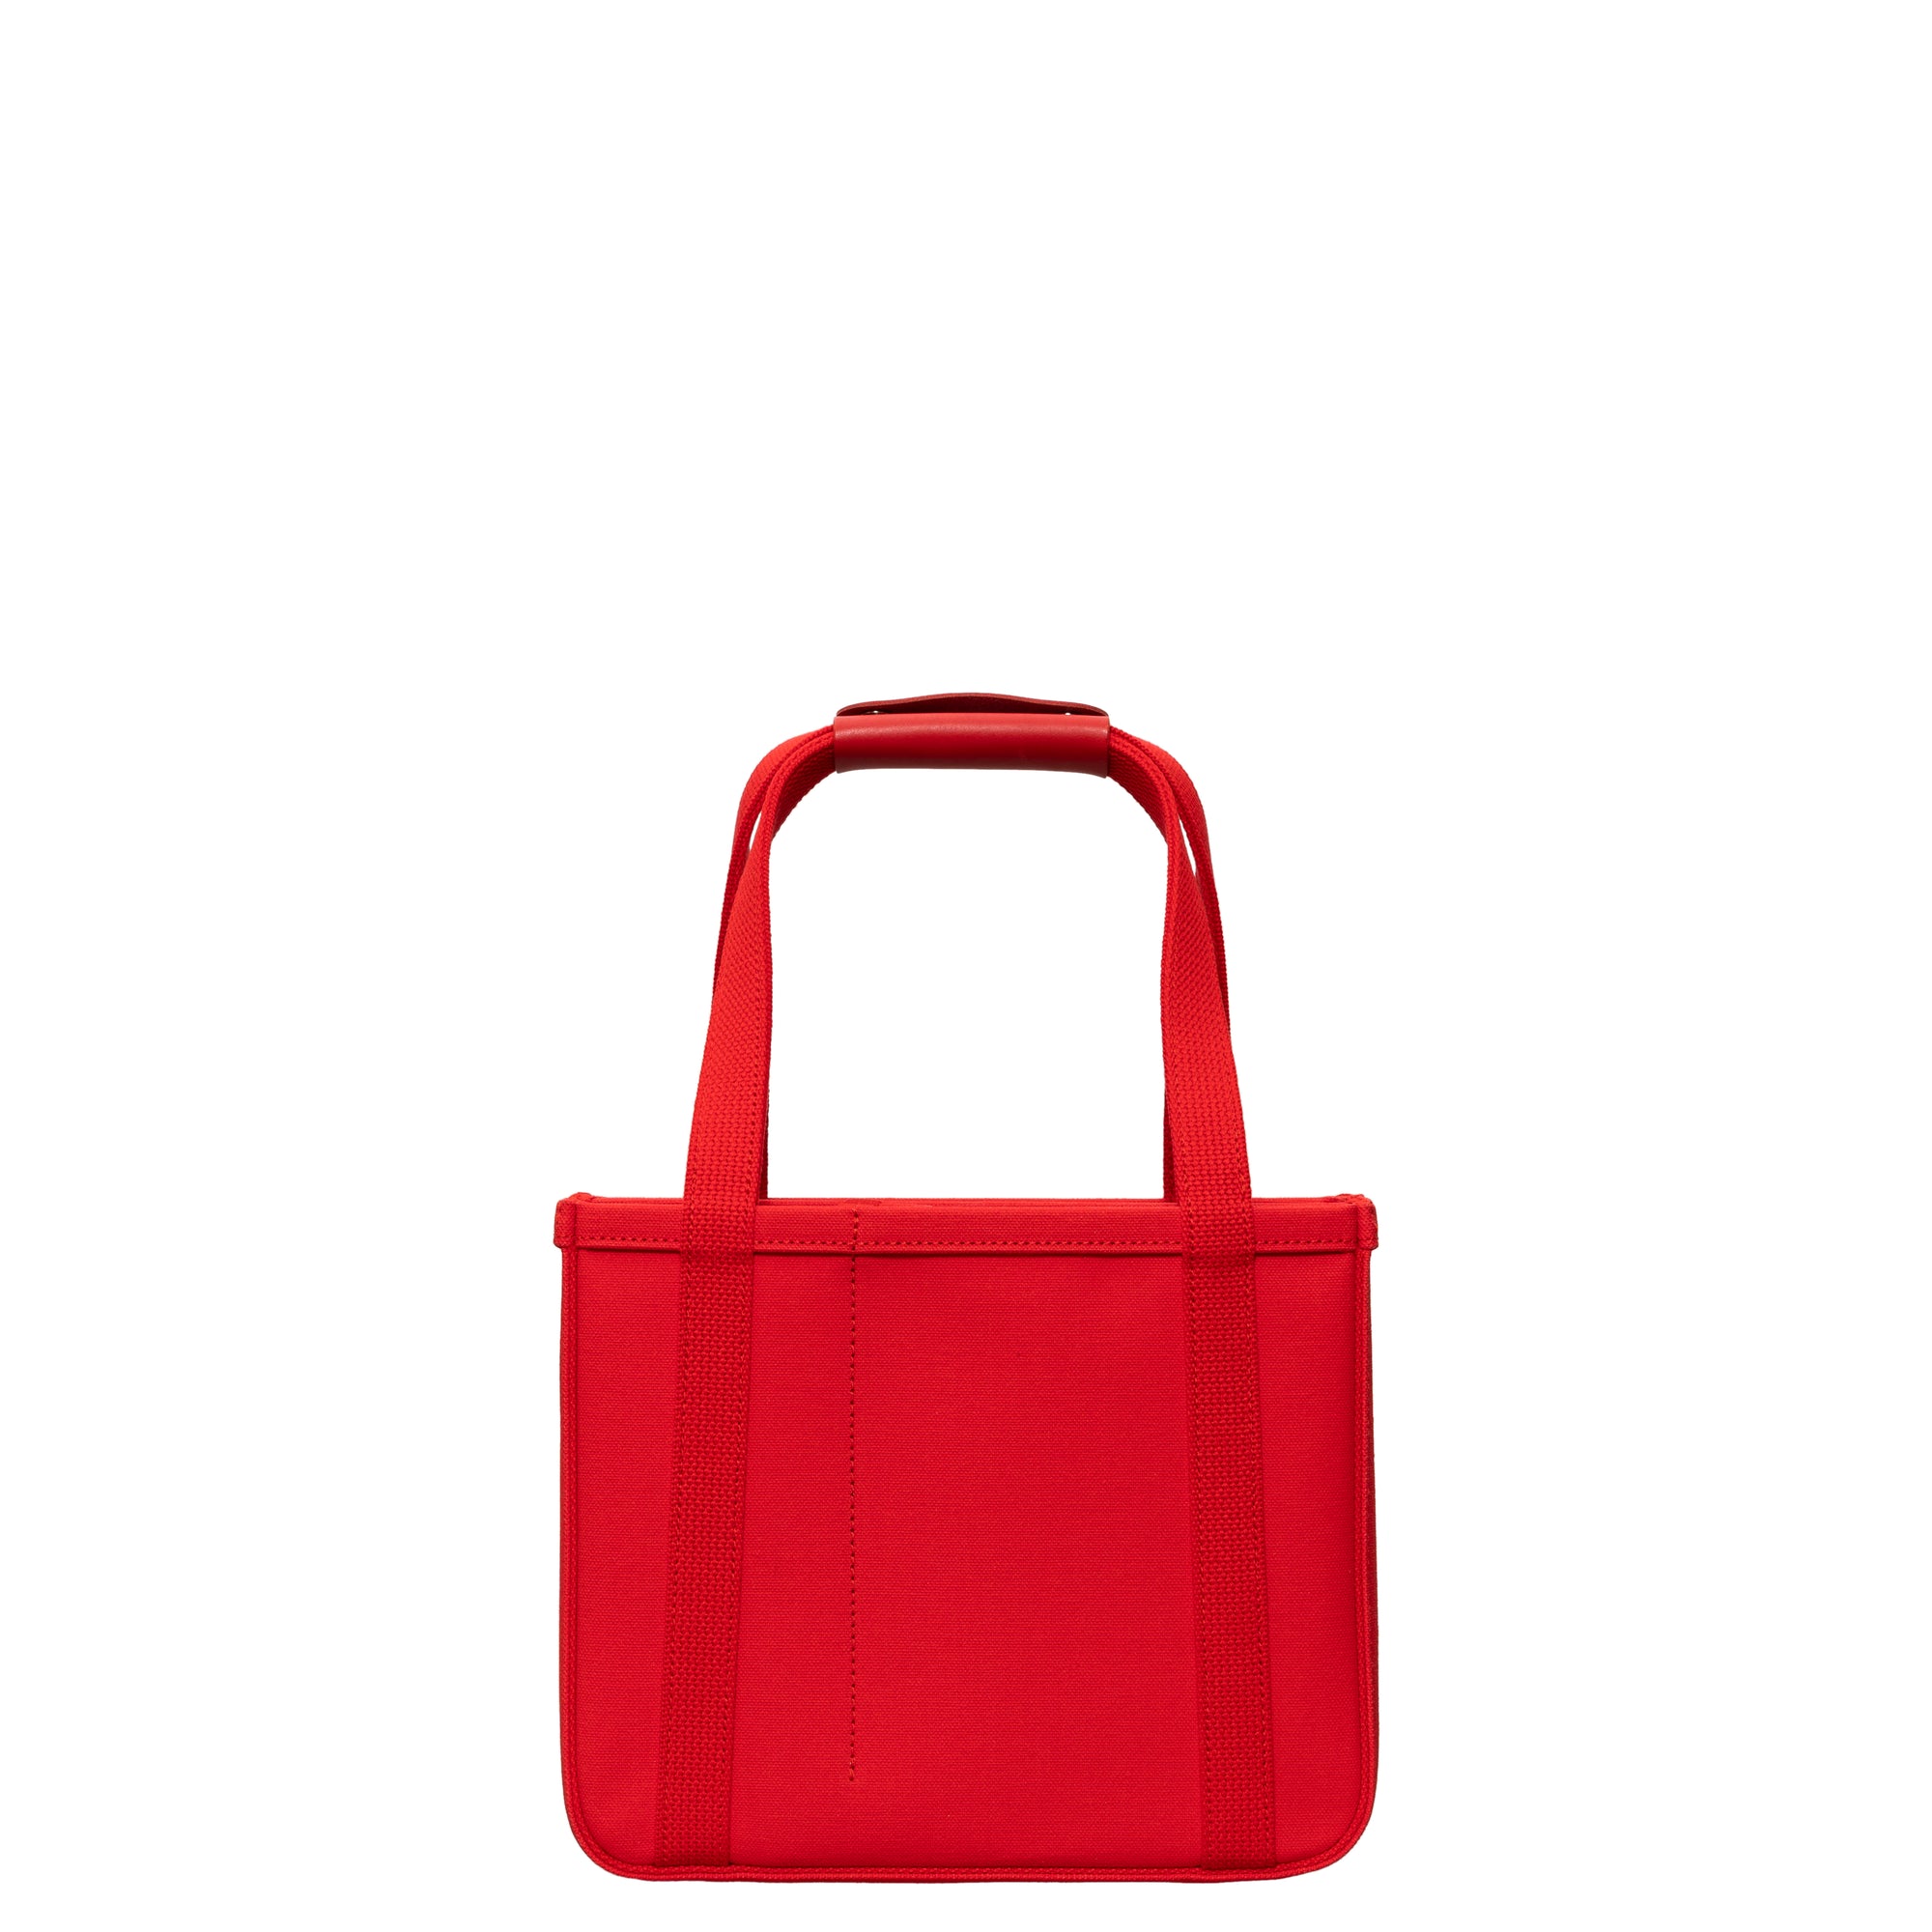 CHACOLI - 06 TOTE W280 X H240 X D120 - (RED) view 1